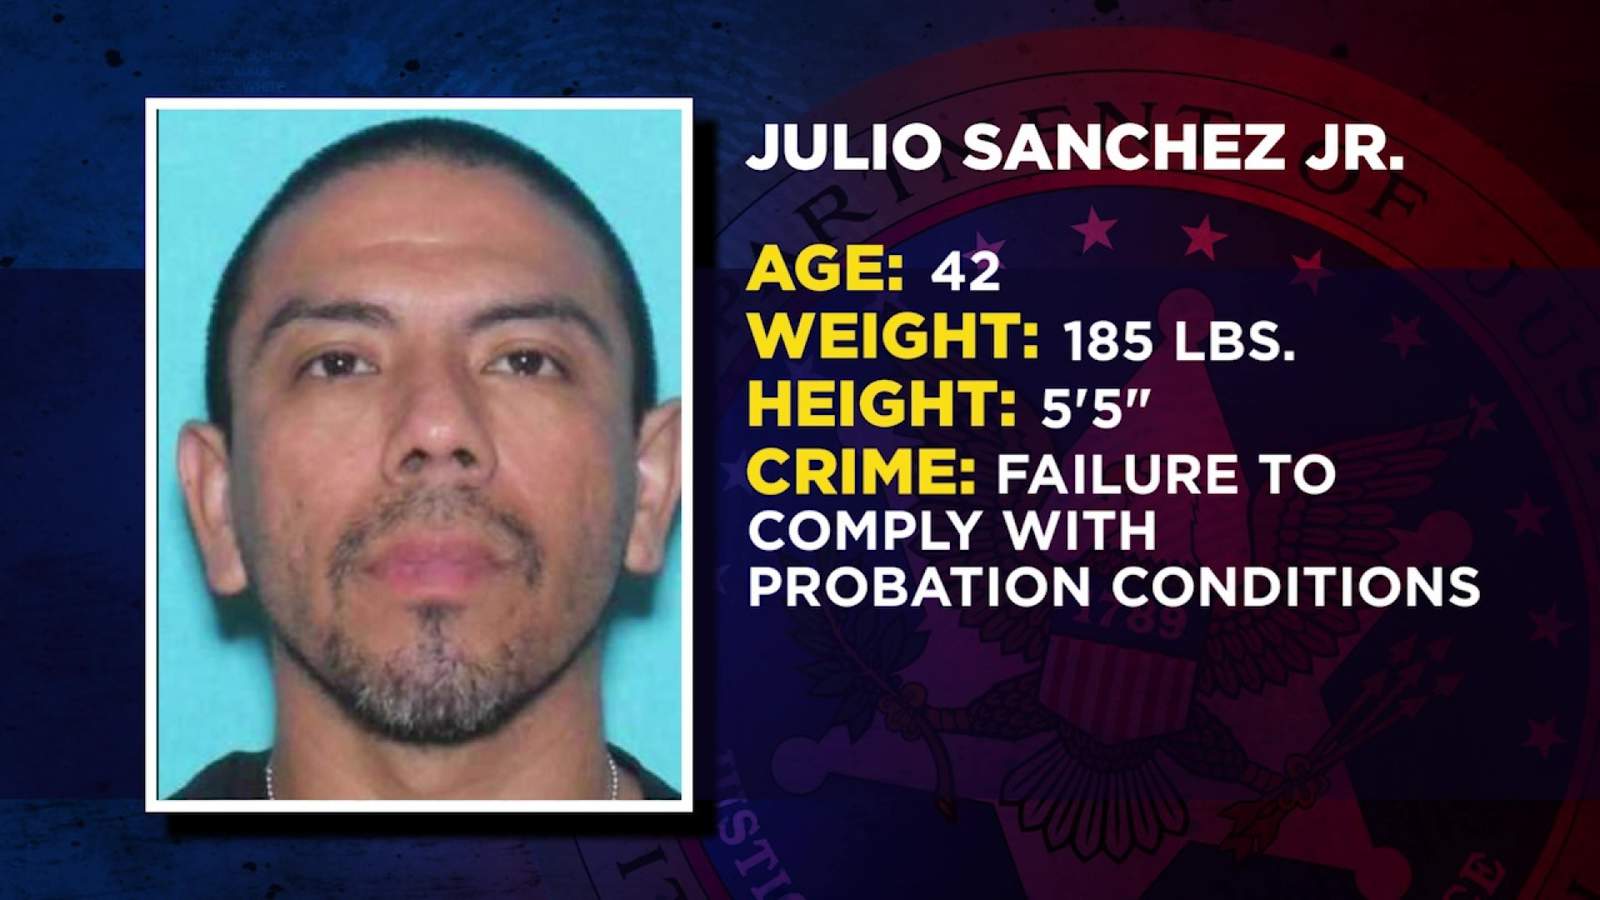 Fugitive sought by Lone Star Fugitive Task Force for failing to comply with probation conditions